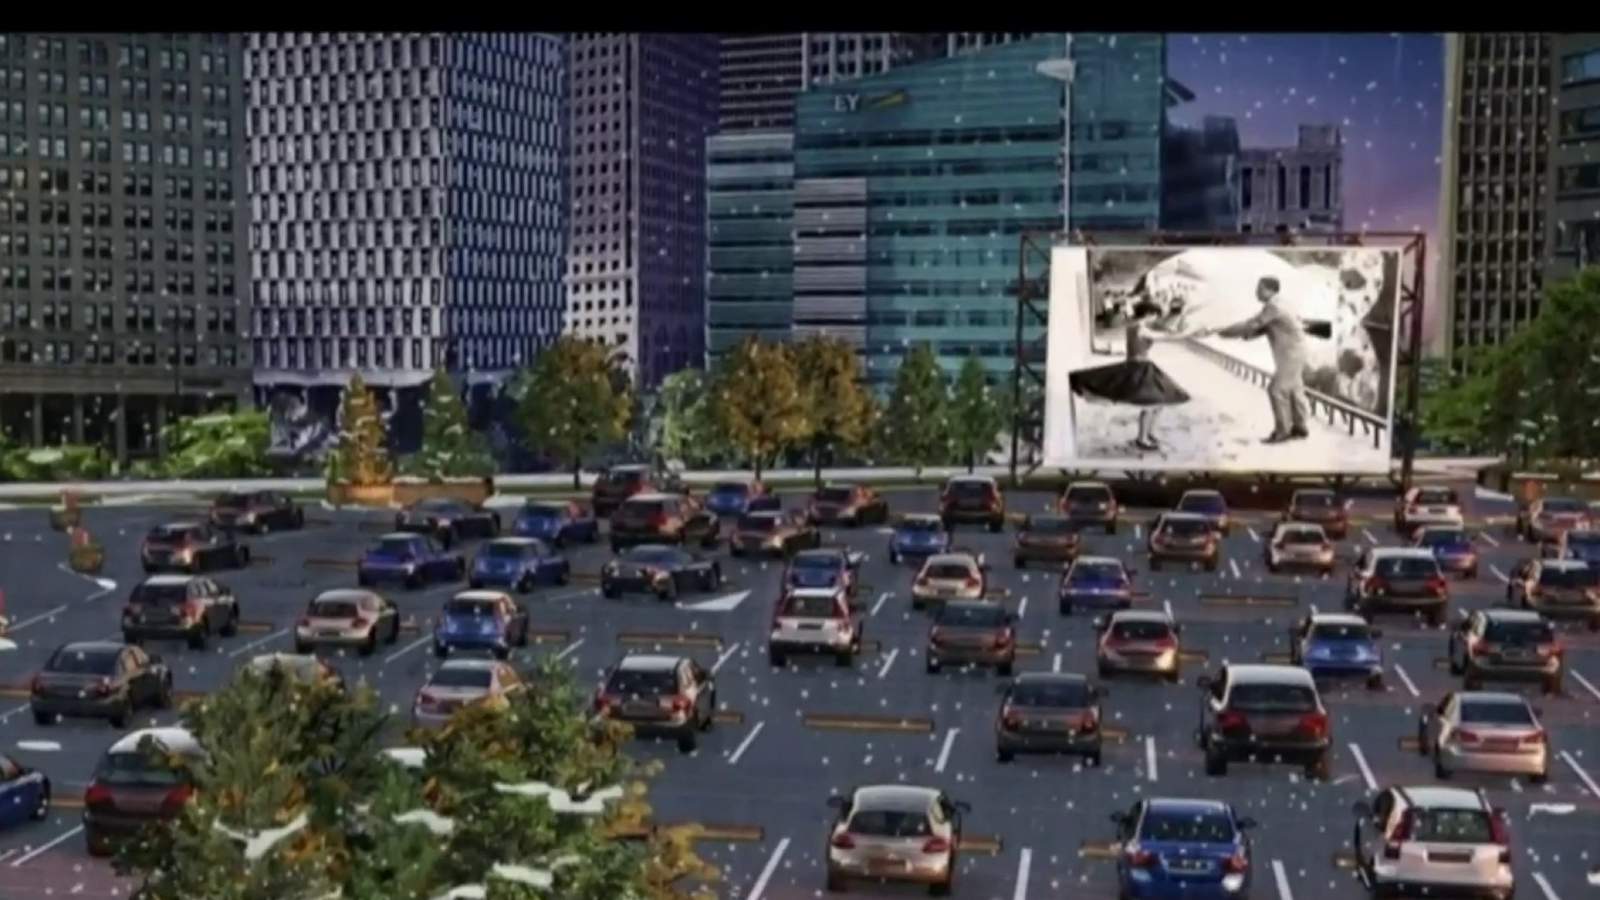 Pop-up drive-in theater coming to Downtown Detroit